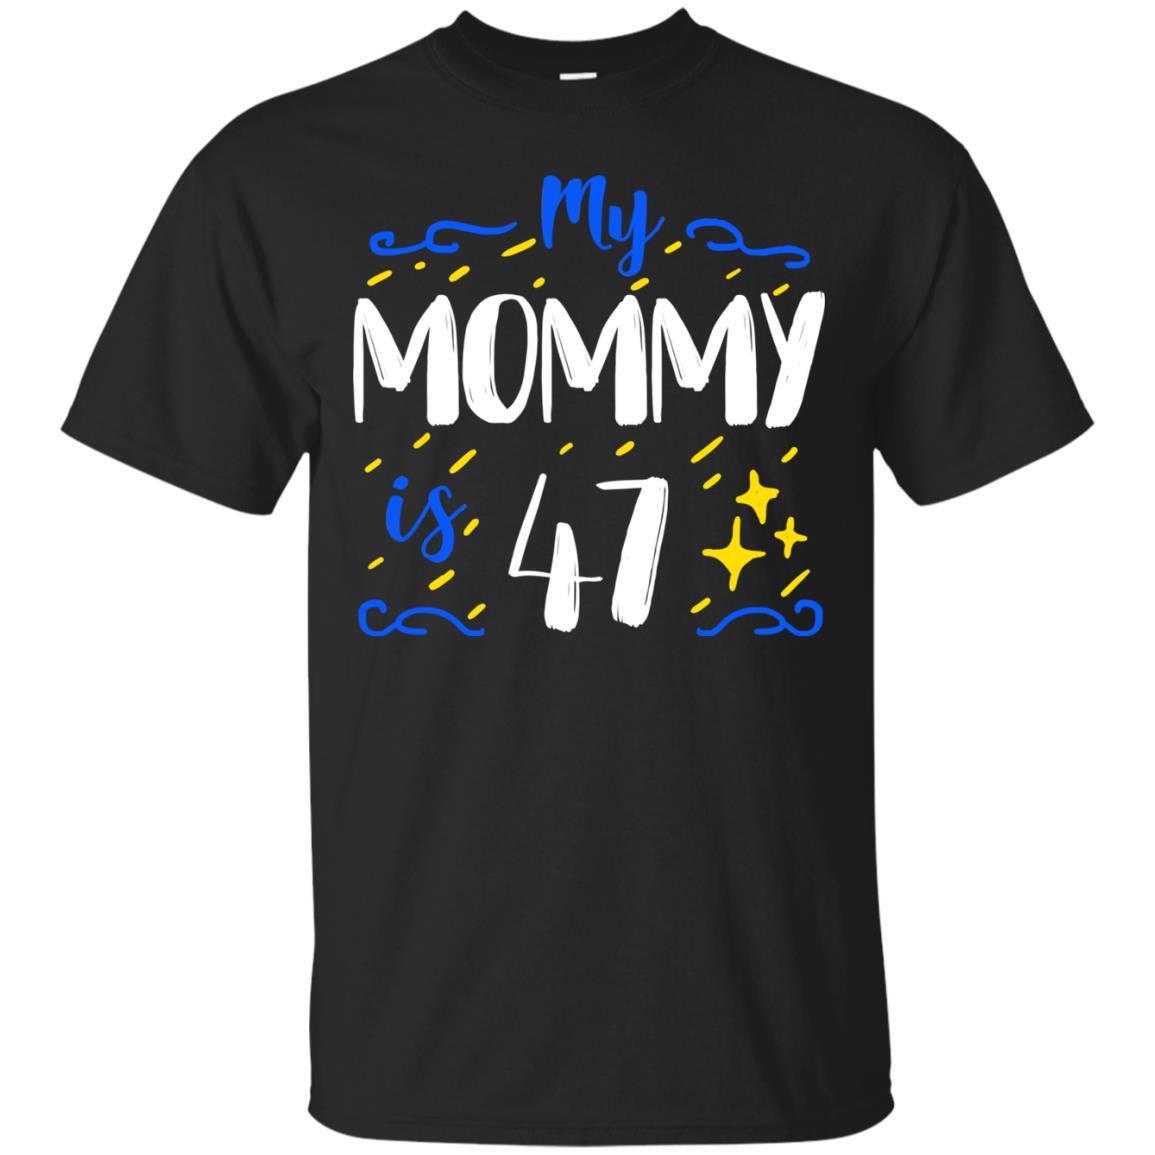 My Mommy Is 47 47th Birthday Mommy Shirt For Sons Or DaughtersG200 Gildan Ultra Cotton T-Shirt